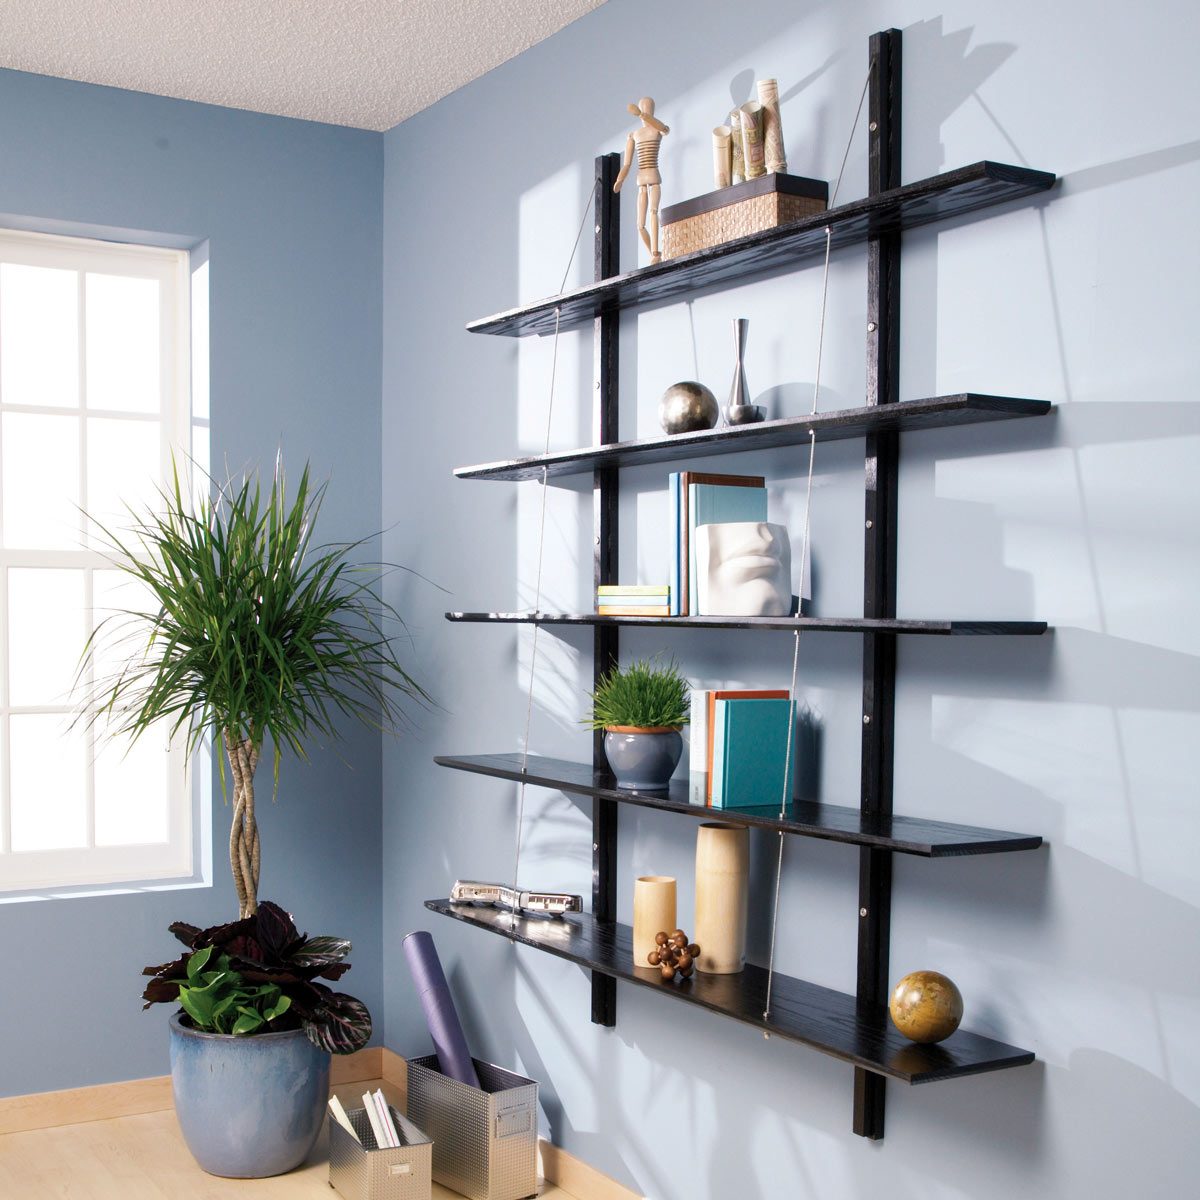 33 Bookcase Projects And Building Tips, Wall Shelf Bookcase